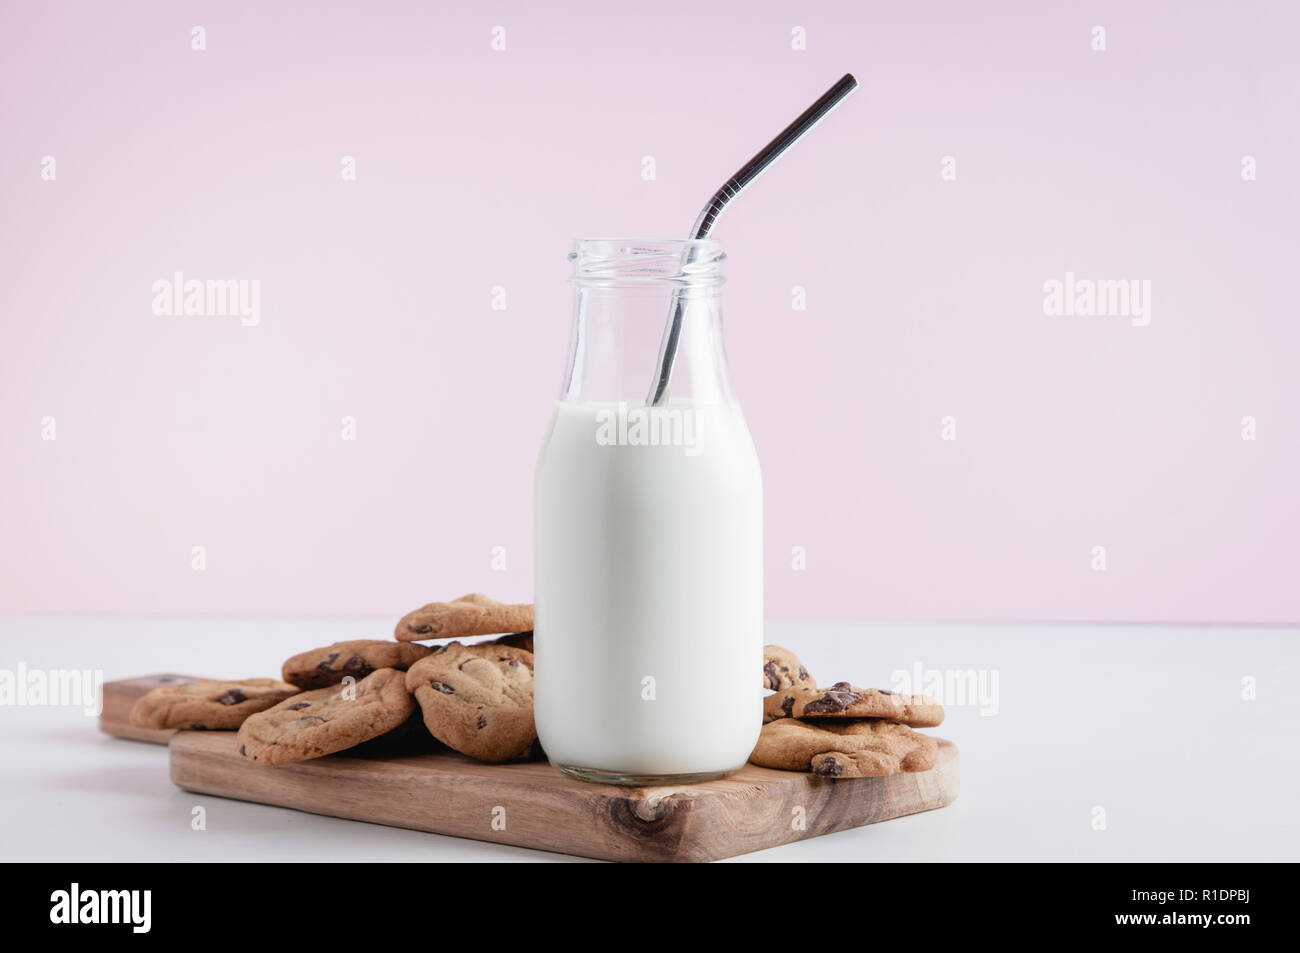 cokkies and a bottle of milk with metal straw on a pink background Stock Photo